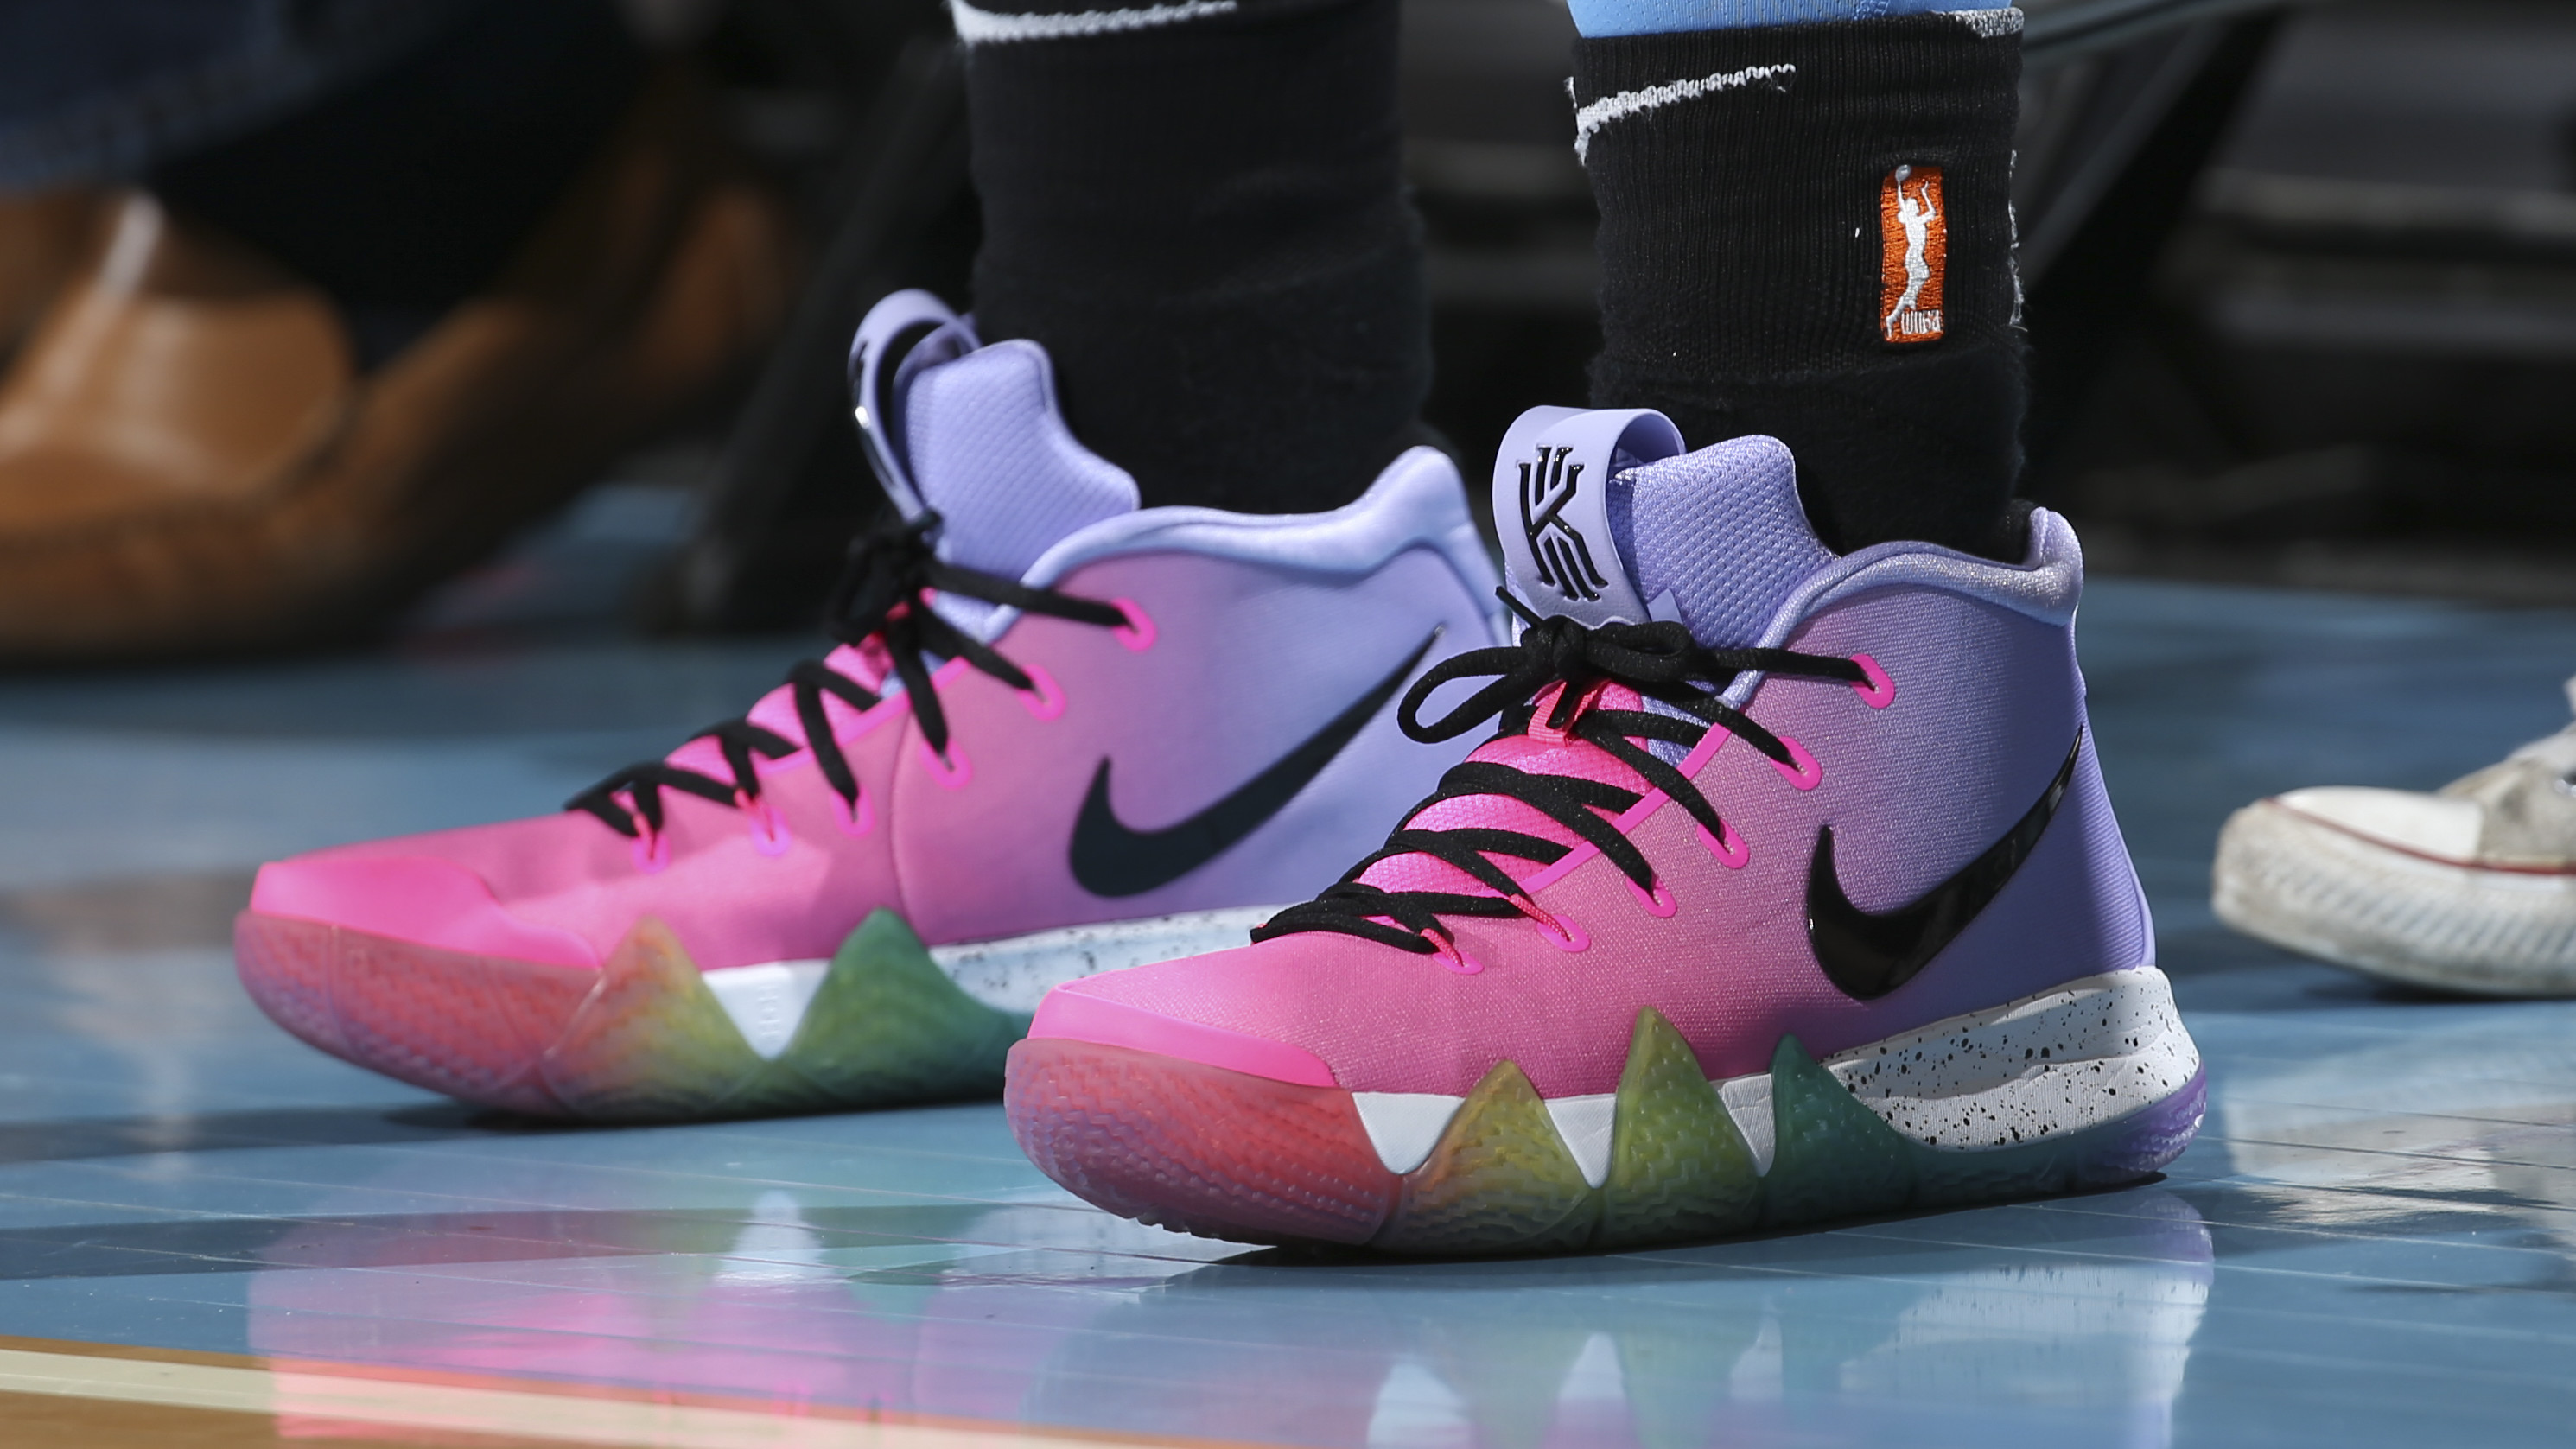 kyrie pride shoes